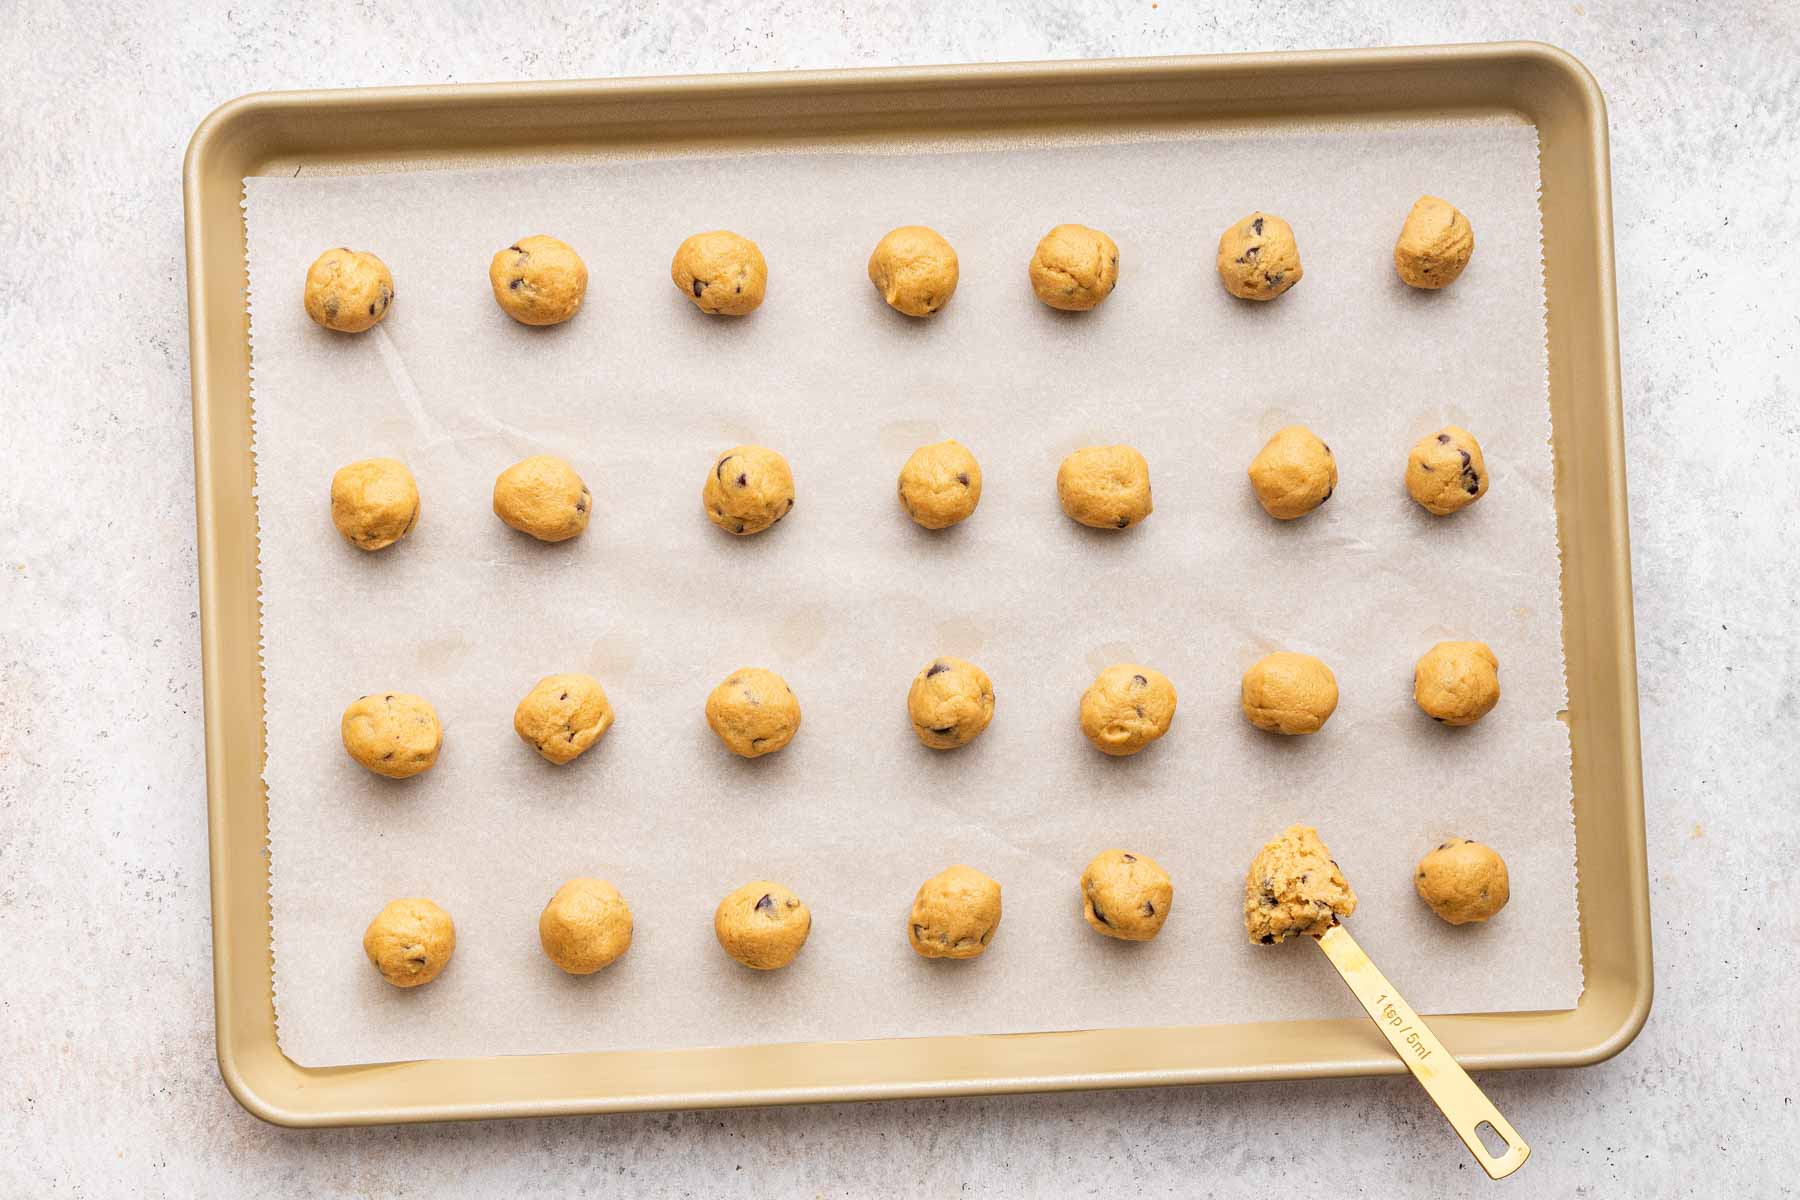 Forty mini chocolate chip cookies on a baking sheet with a teaspoon.